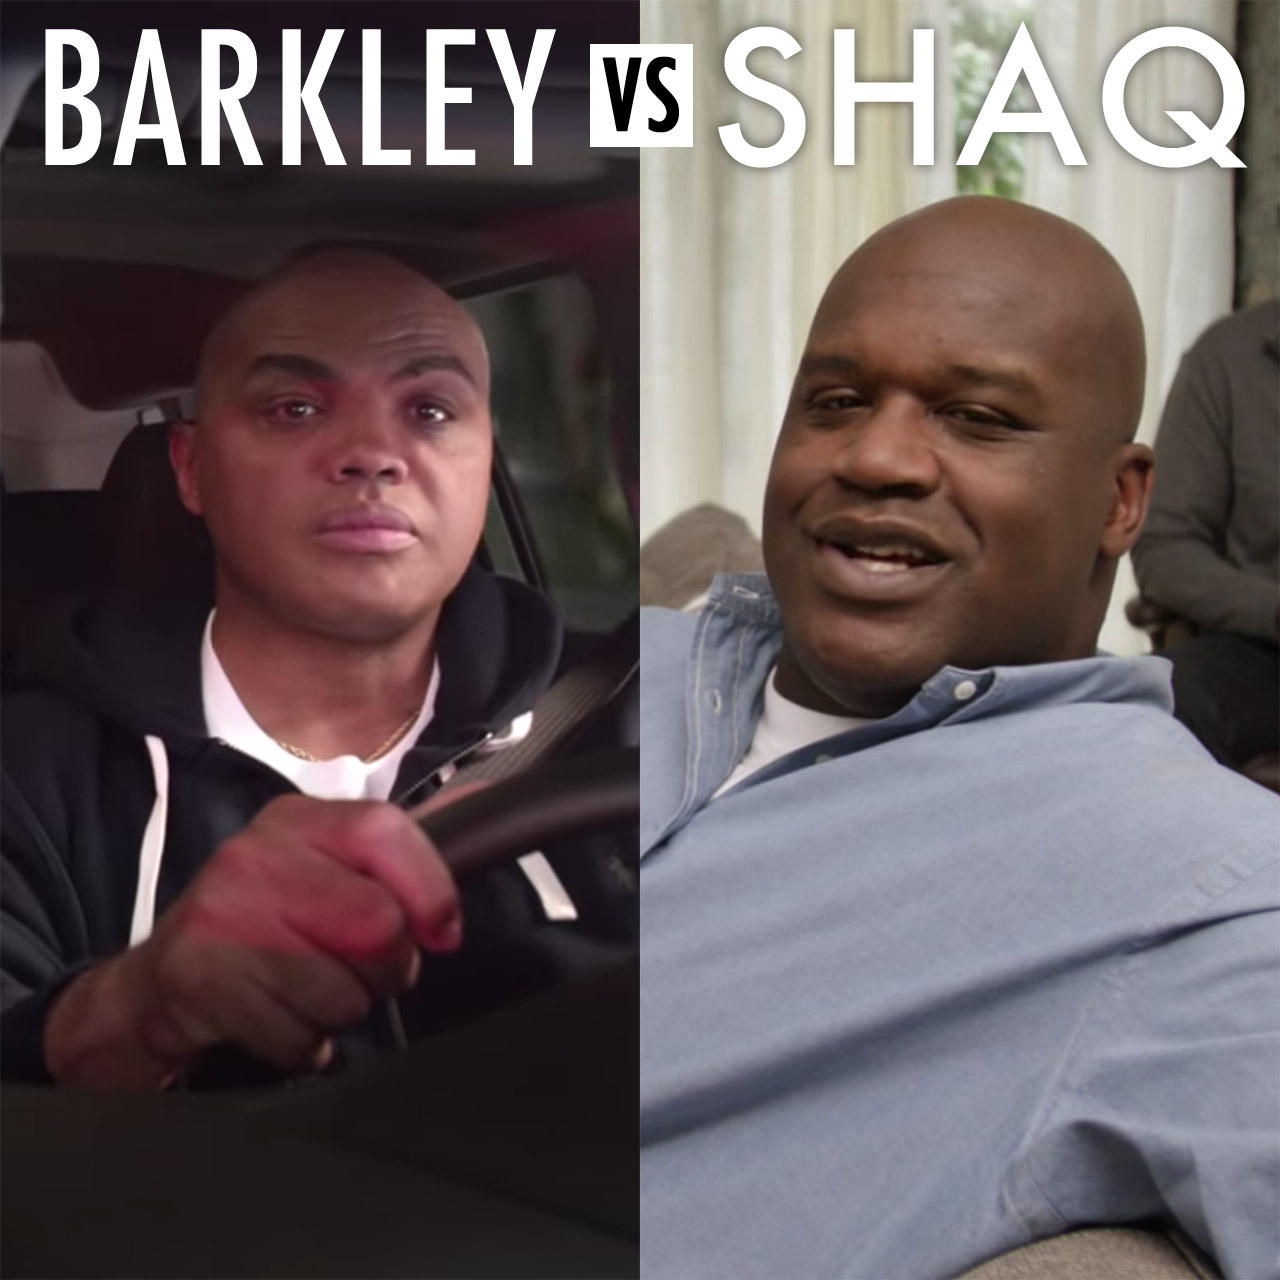 Charles Barkley versus Shaquille O'Neal in March Madness ads